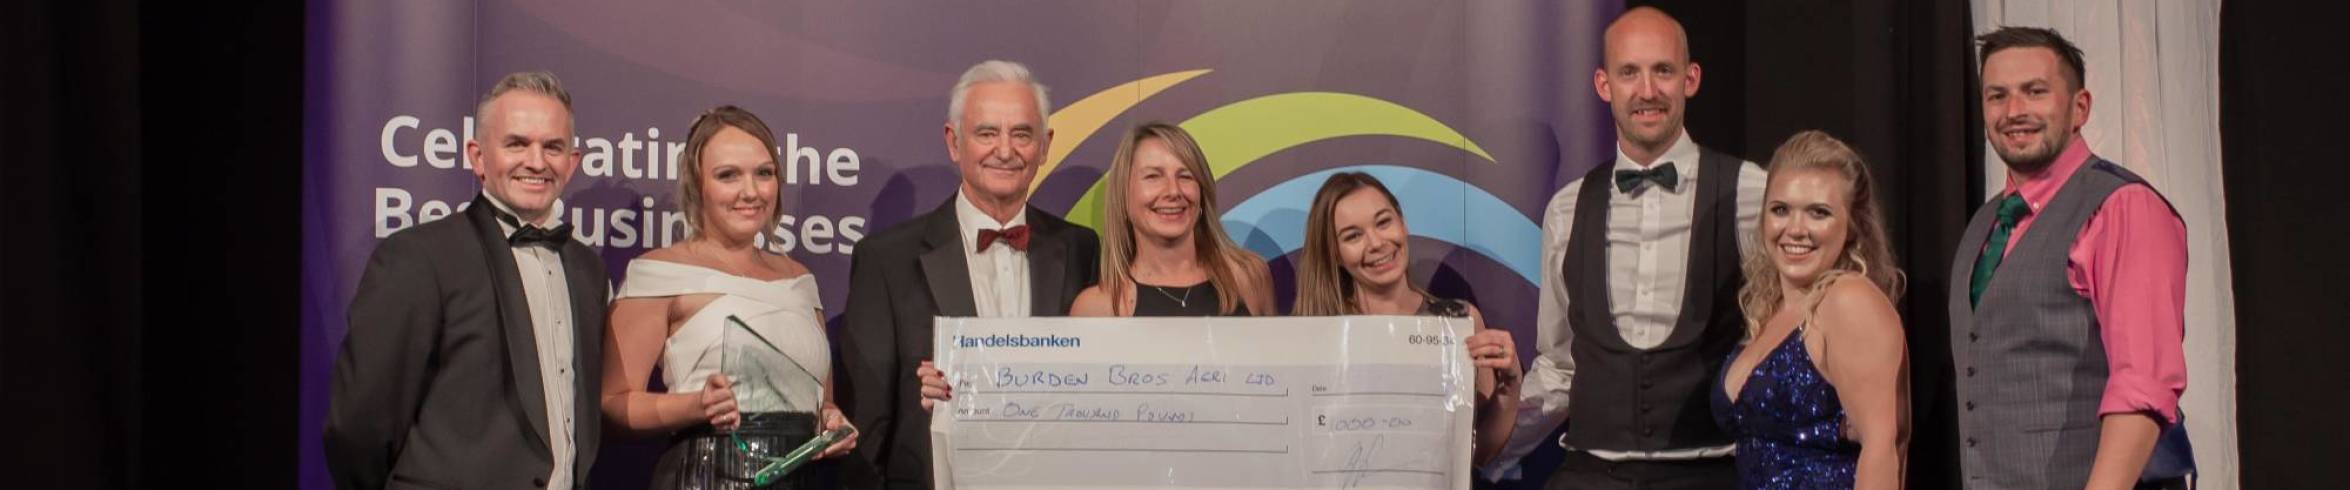 Swale Business of the Year 2019 - Burden Bros Agri